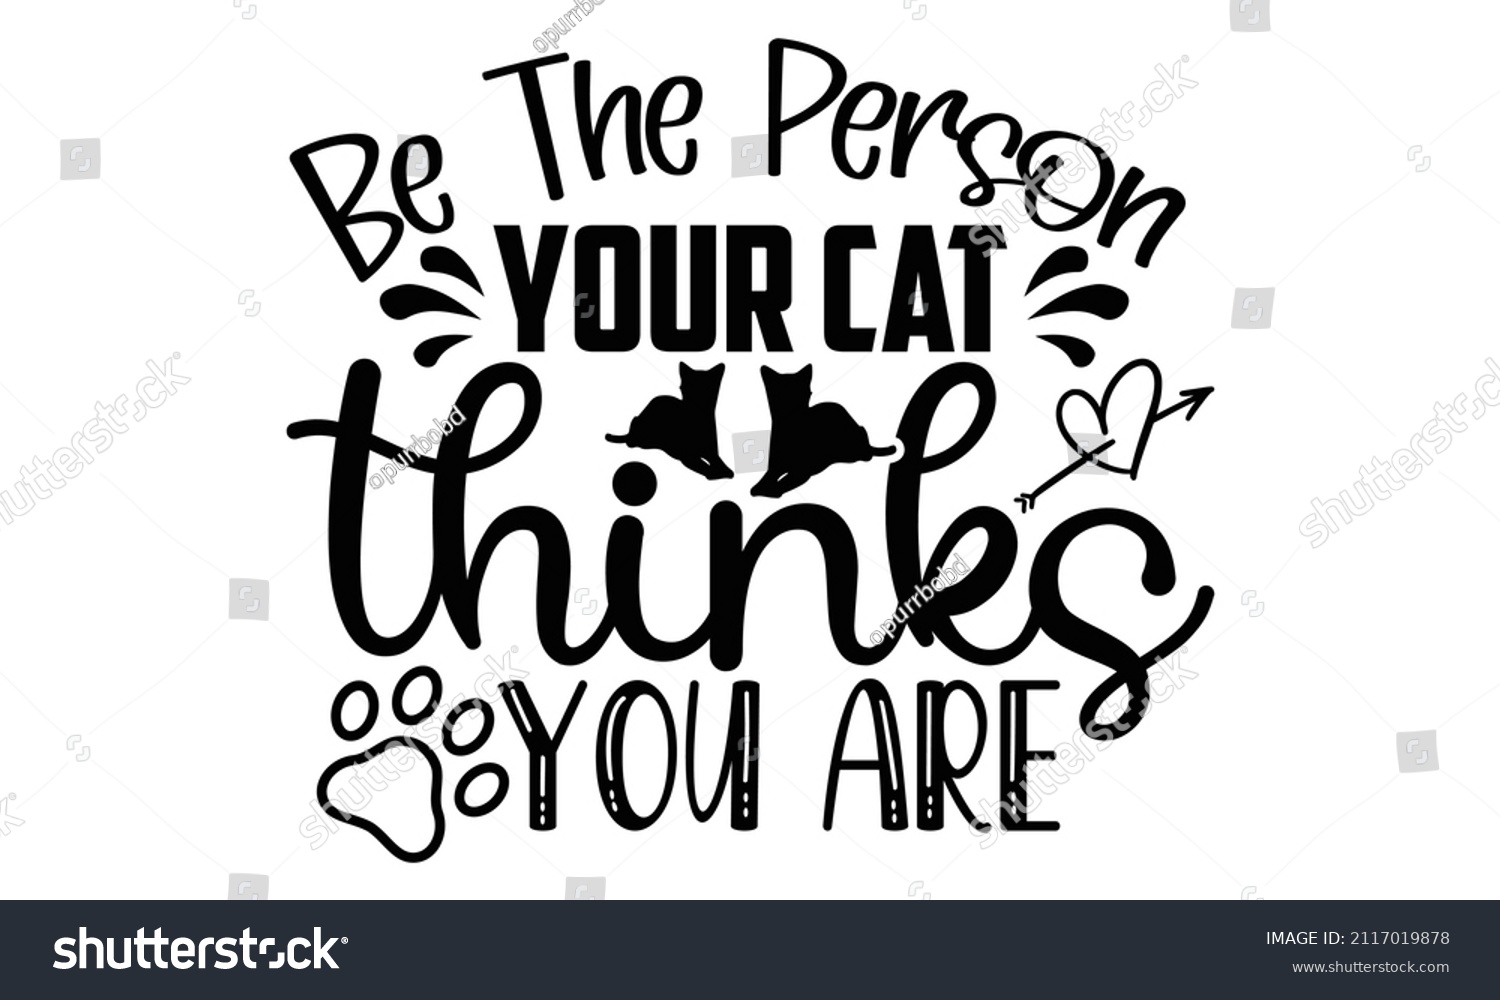 SVG of Be the person your cat thinks you are- Cat t-shirt design, Hand drawn lettering phrase, Calligraphy t-shirt design, Isolated on white background, Handwritten vector sign, SVG, EPS 10 svg